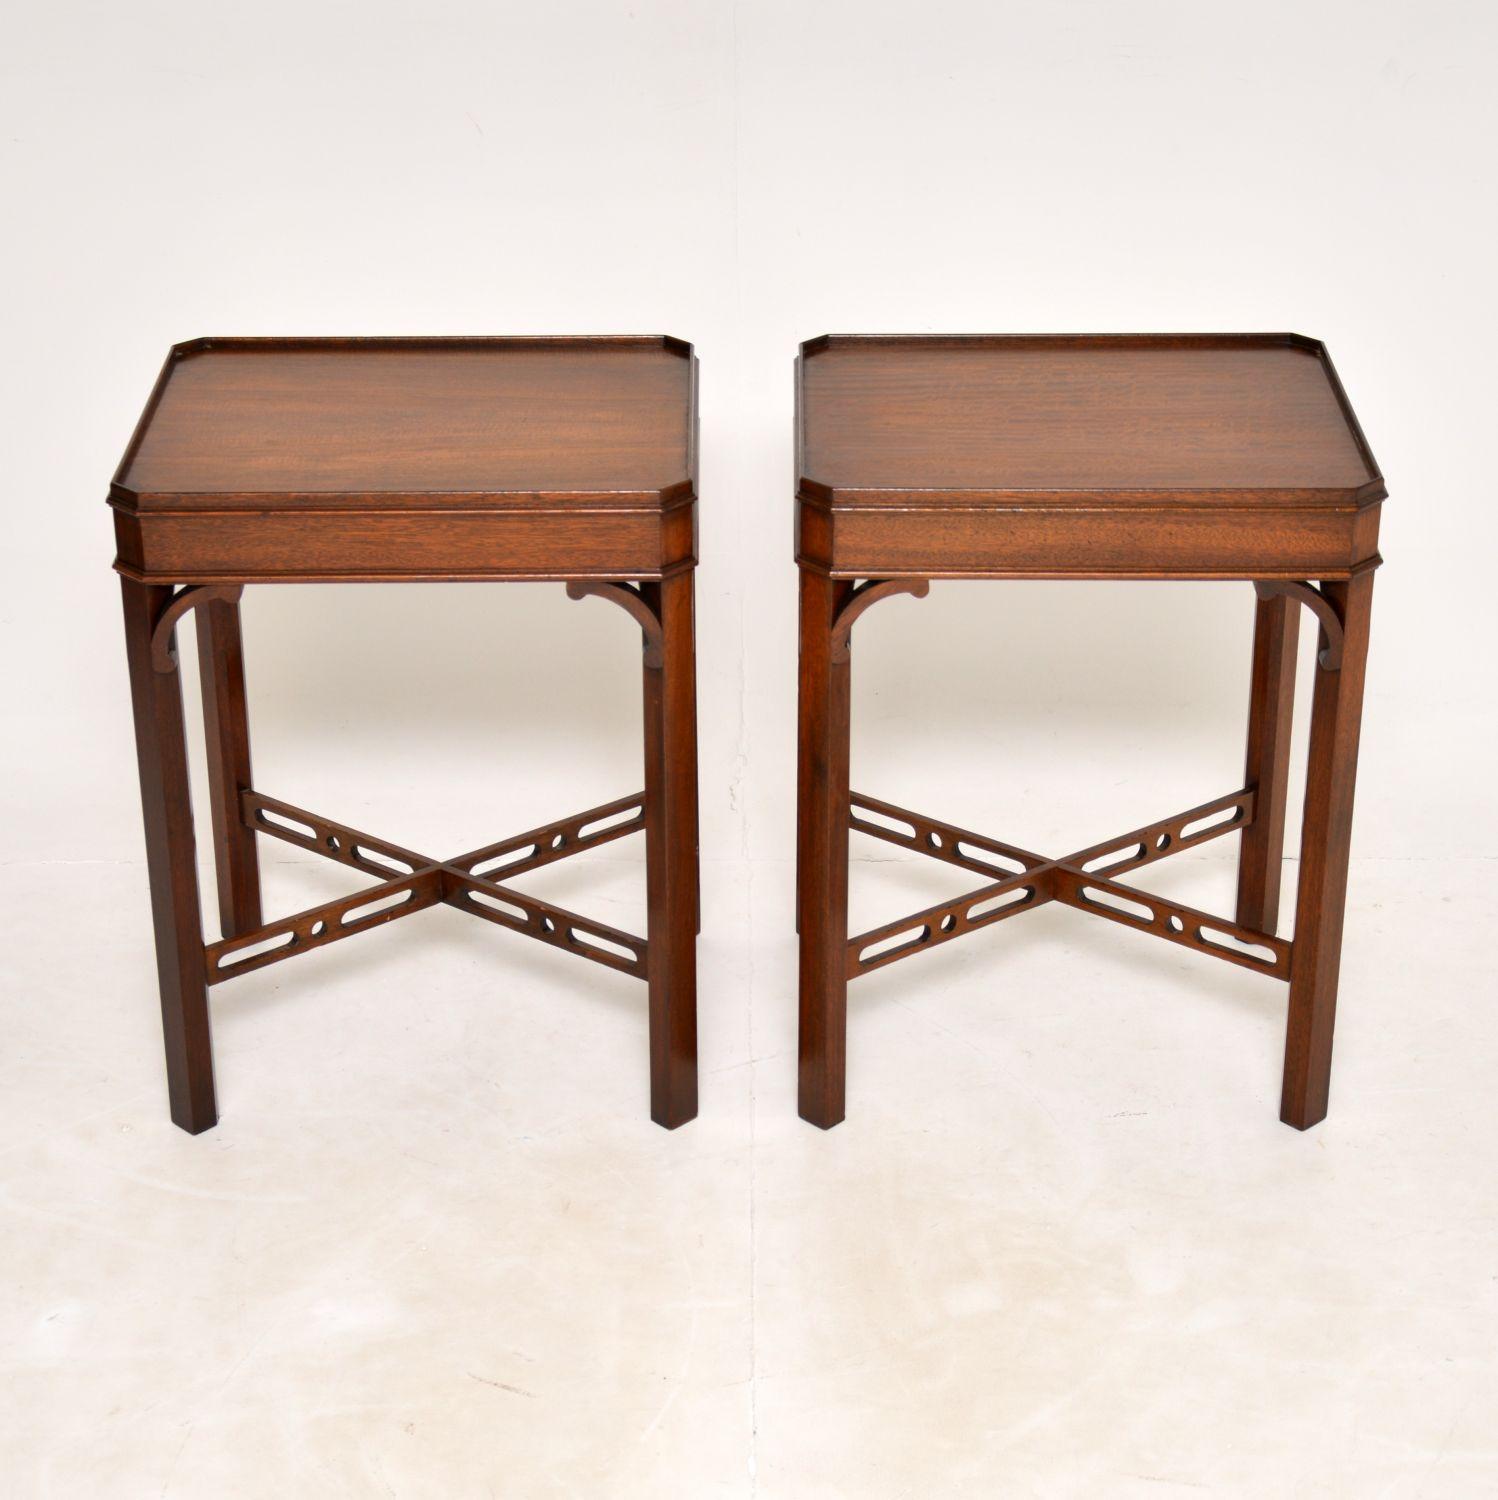 An excellent pair of antique Chippendale style side tables in wood. These were made in England, they date from around the 1930-50’s.

The quality is superb and they are a very useful size. They have beautiful pierced stretchered bases, canted